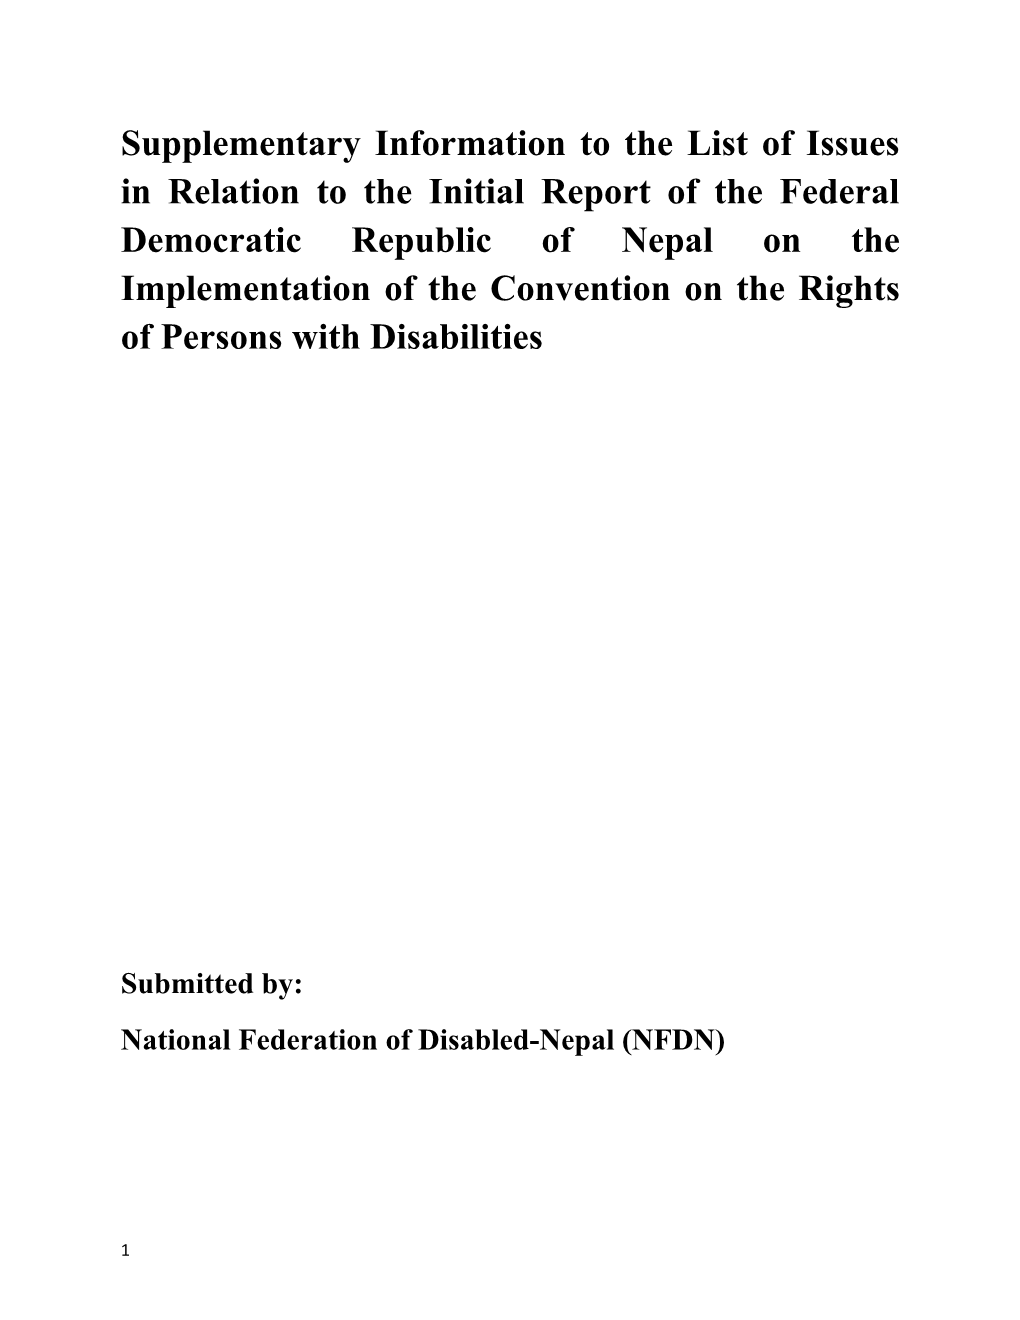 National Federation of Disabled-Nepal (NFDN)